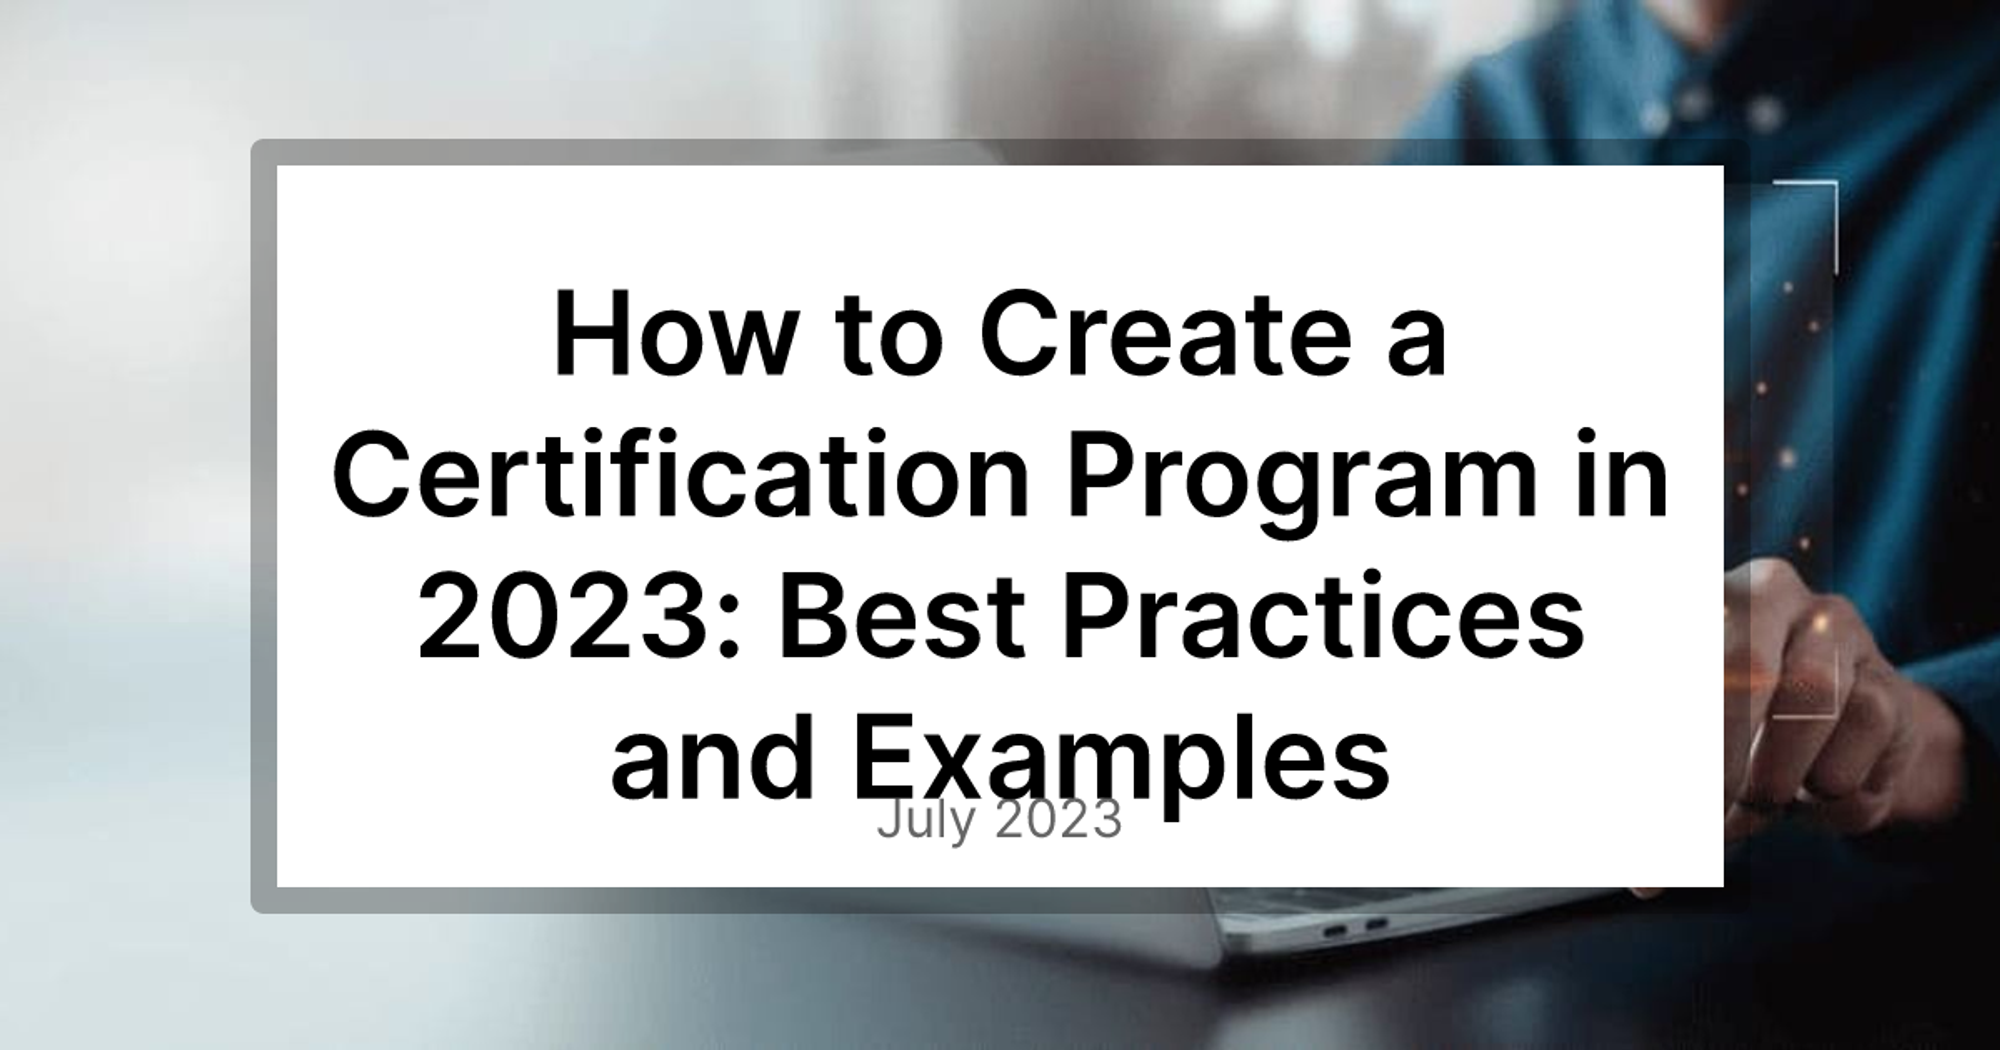 How to Create a Certification Program in 2023: Best Practices and Examples